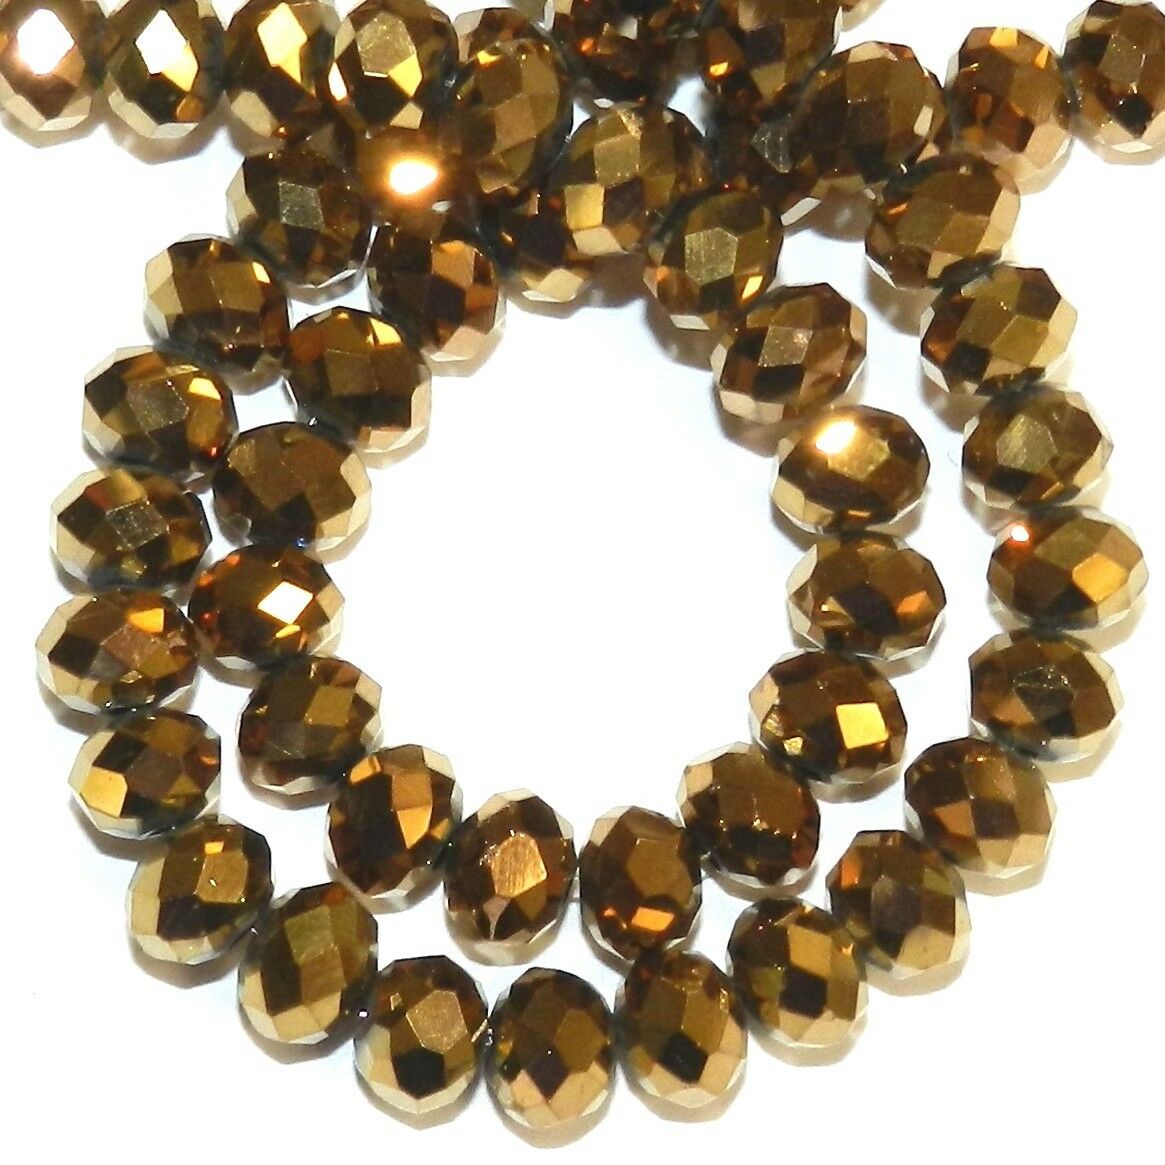 Cr232 Metallic Gold Bronze 6mm Rondelle Faceted Cut Crystal Glass Beads 19"